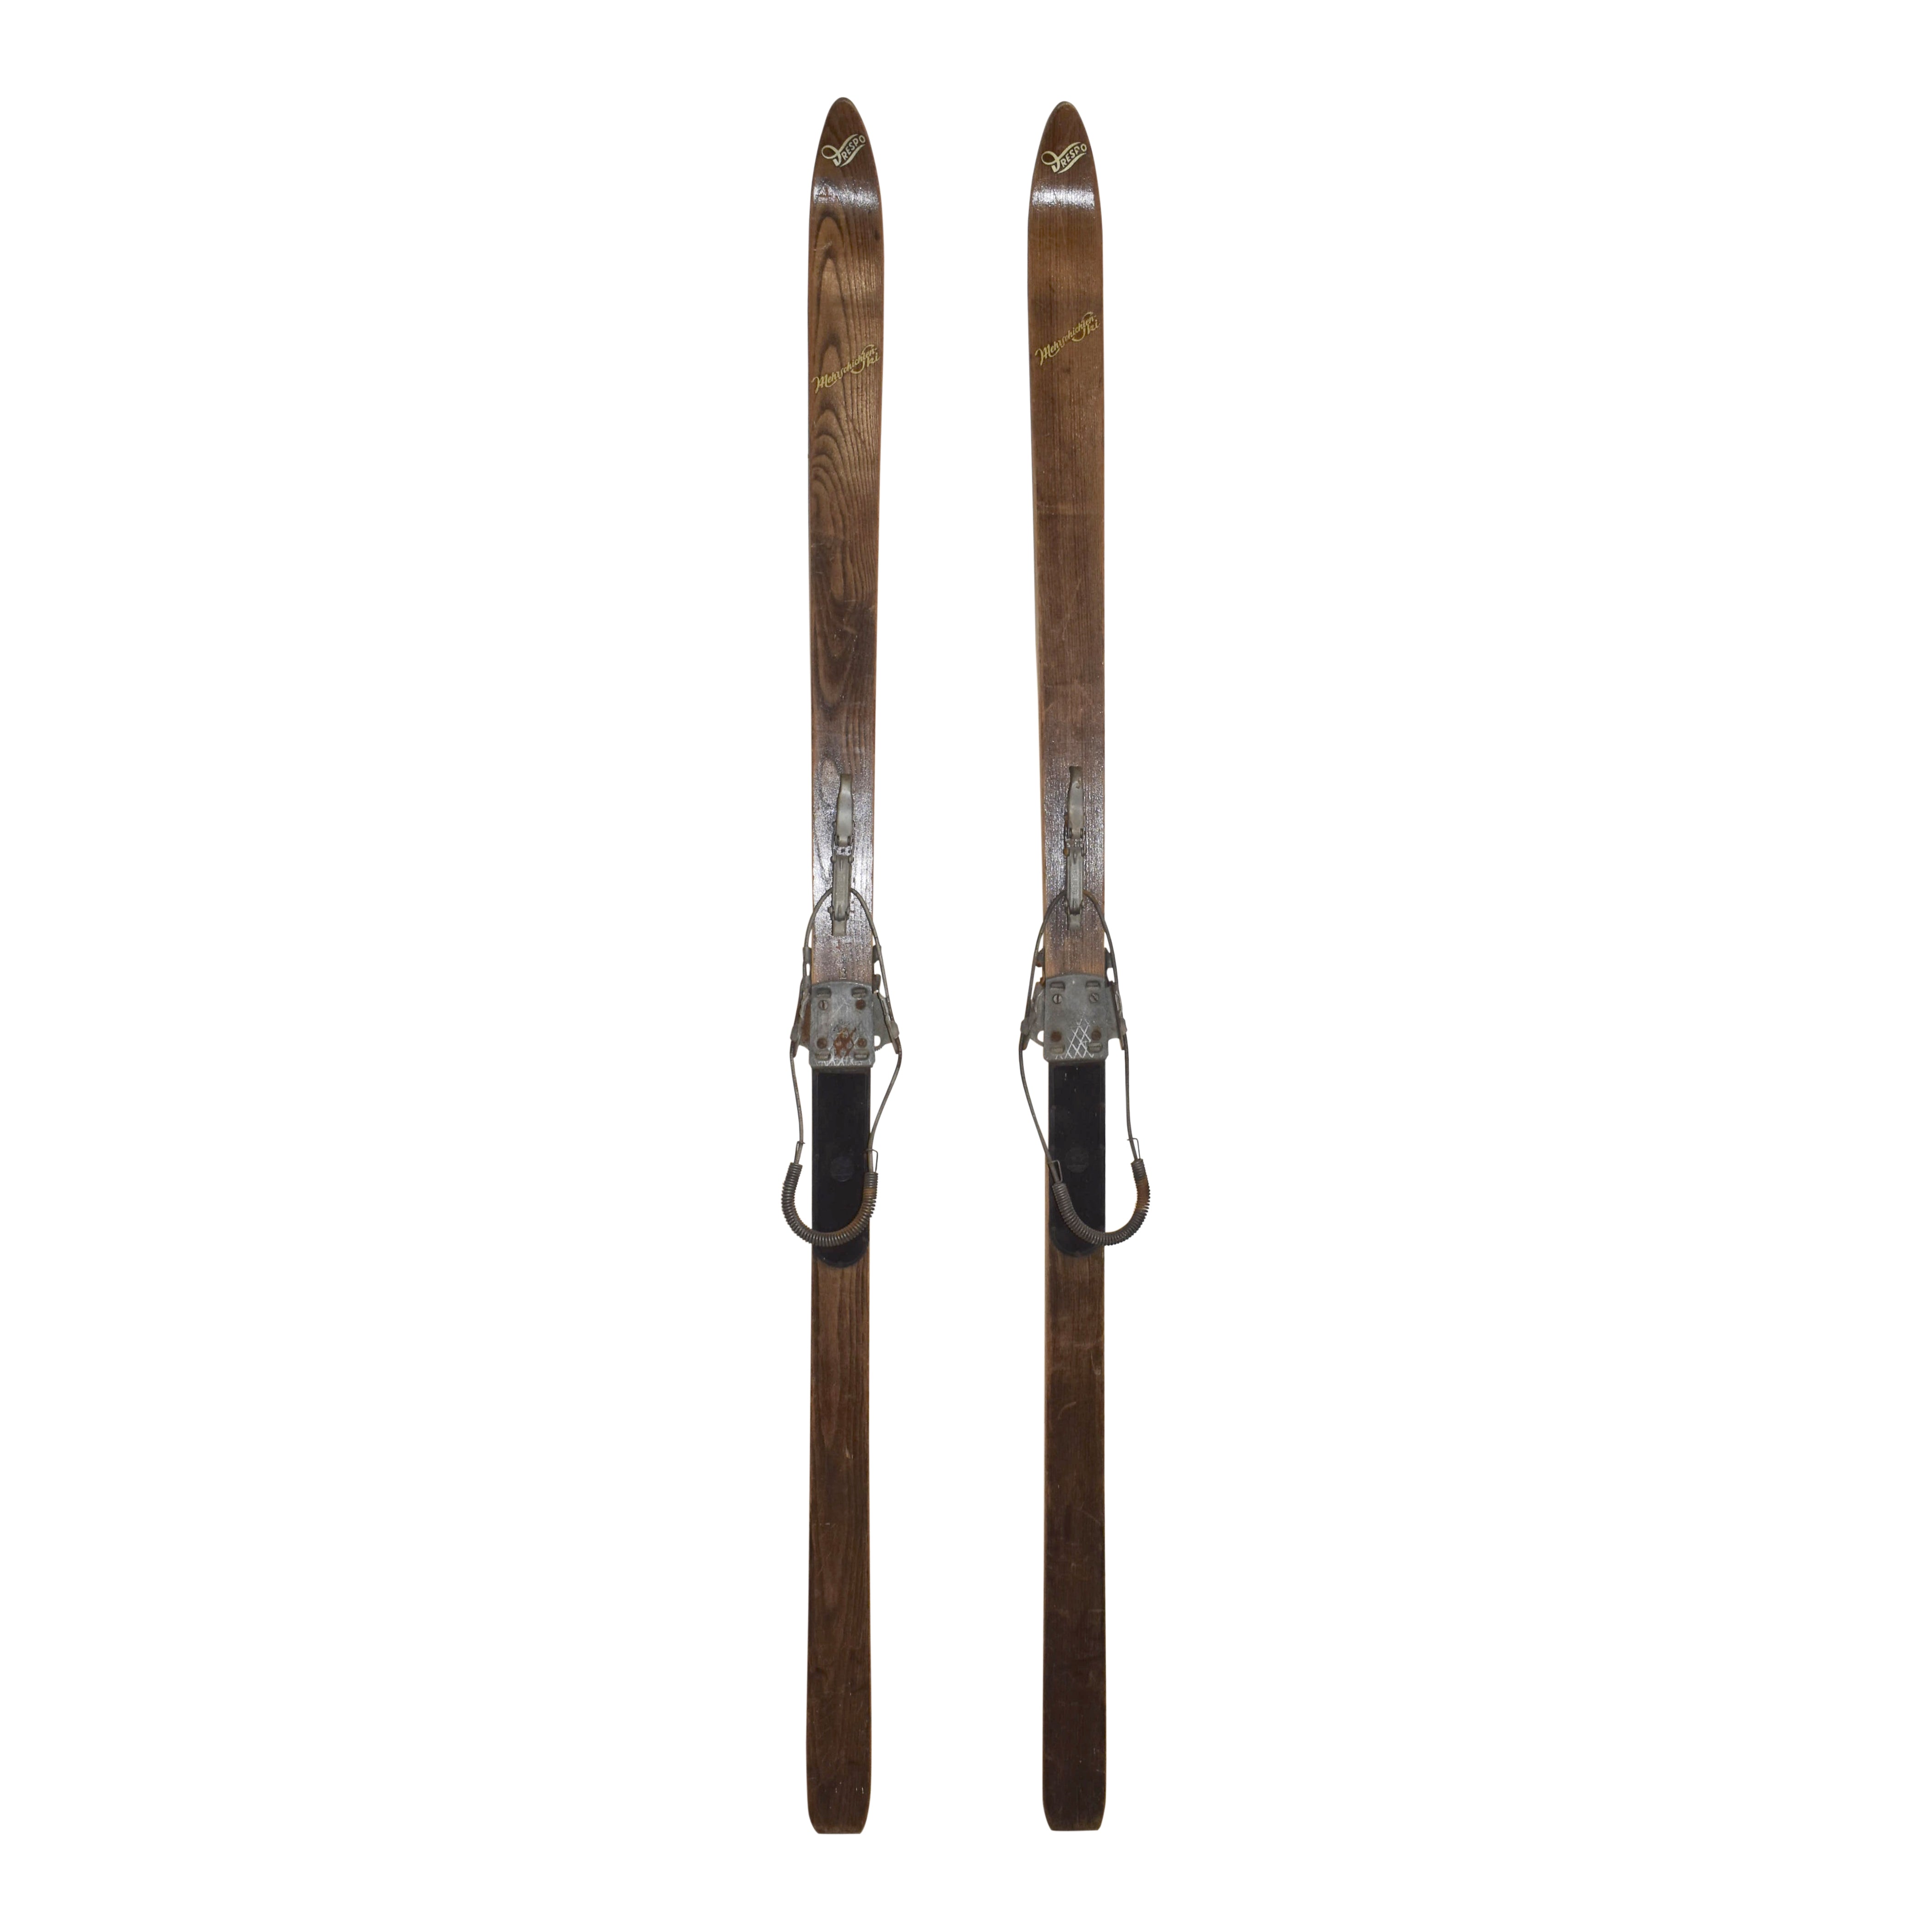 German Drespo Skis with Inselberg Cable Bindings